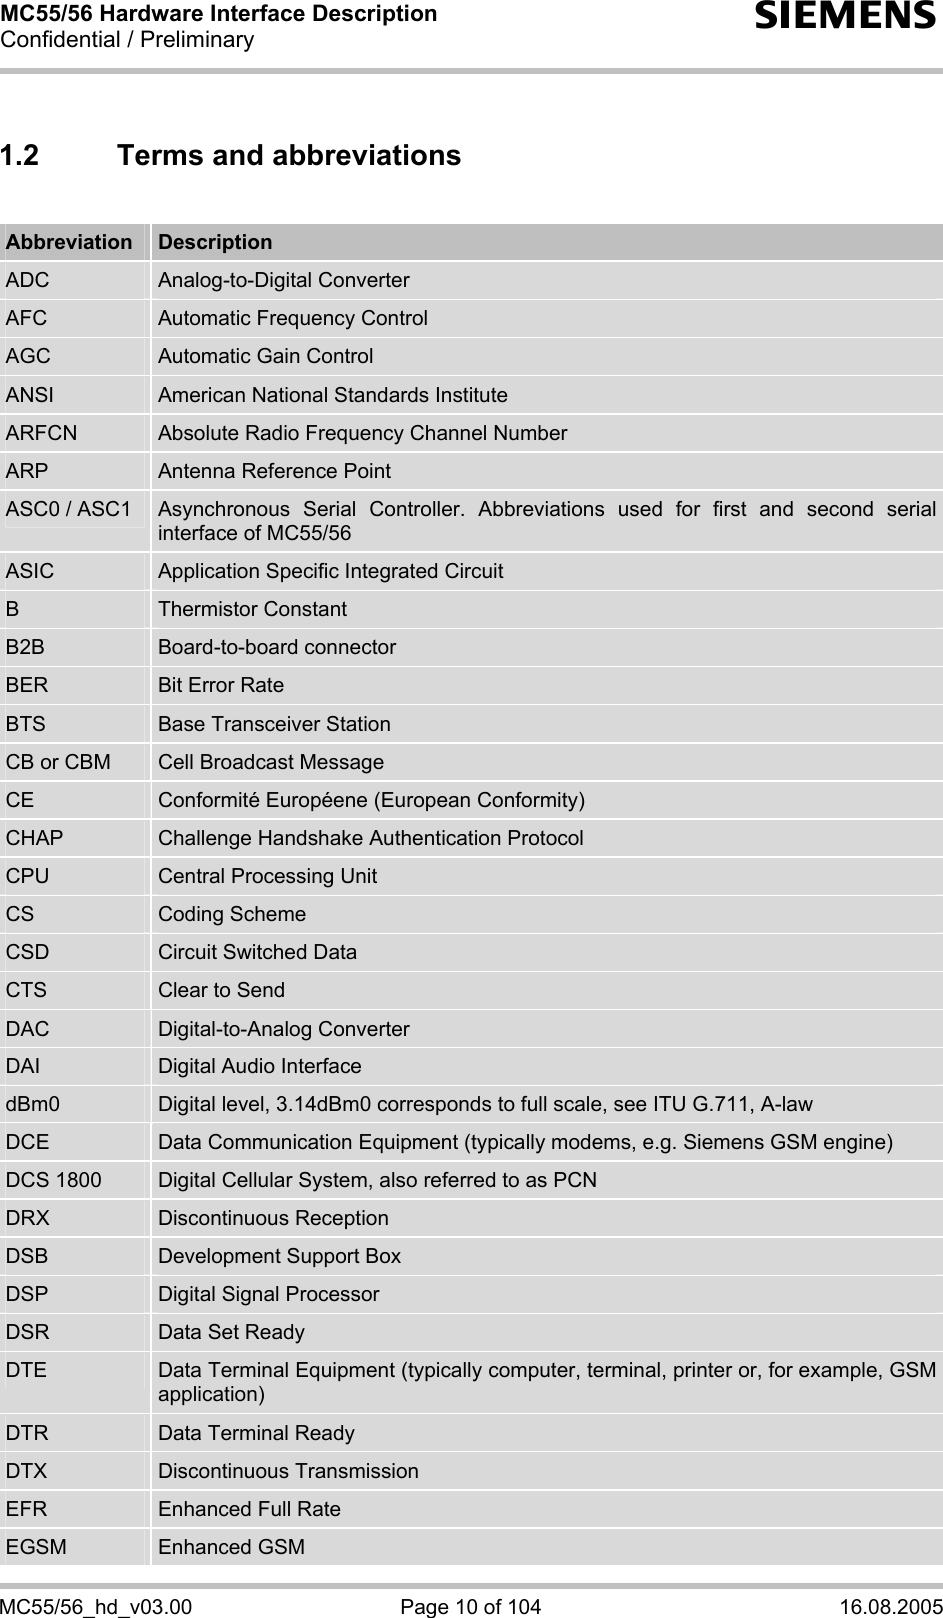 MC55/56 Hardware Interface Description Confidential / Preliminary s MC55/56_hd_v03.00  Page 10 of 104  16.08.2005 1.2  Terms and abbreviations  Abbreviation  Description ADC  Analog-to-Digital Converter AFC  Automatic Frequency Control AGC  Automatic Gain Control ANSI  American National Standards Institute ARFCN  Absolute Radio Frequency Channel Number ARP  Antenna Reference Point ASC0 / ASC1  Asynchronous Serial Controller. Abbreviations used for first and second serial interface of MC55/56 ASIC  Application Specific Integrated Circuit B  Thermistor Constant B2B  Board-to-board connector BER  Bit Error Rate BTS  Base Transceiver Station CB or CBM  Cell Broadcast Message CE  Conformité Européene (European Conformity) CHAP  Challenge Handshake Authentication Protocol CPU  Central Processing Unit CS  Coding Scheme CSD  Circuit Switched Data CTS  Clear to Send DAC  Digital-to-Analog Converter DAI  Digital Audio Interface dBm0  Digital level, 3.14dBm0 corresponds to full scale, see ITU G.711, A-law DCE  Data Communication Equipment (typically modems, e.g. Siemens GSM engine) DCS 1800  Digital Cellular System, also referred to as PCN DRX  Discontinuous Reception DSB  Development Support Box DSP  Digital Signal Processor DSR  Data Set Ready DTE  Data Terminal Equipment (typically computer, terminal, printer or, for example, GSM application) DTR  Data Terminal Ready DTX  Discontinuous Transmission EFR  Enhanced Full Rate EGSM  Enhanced GSM 